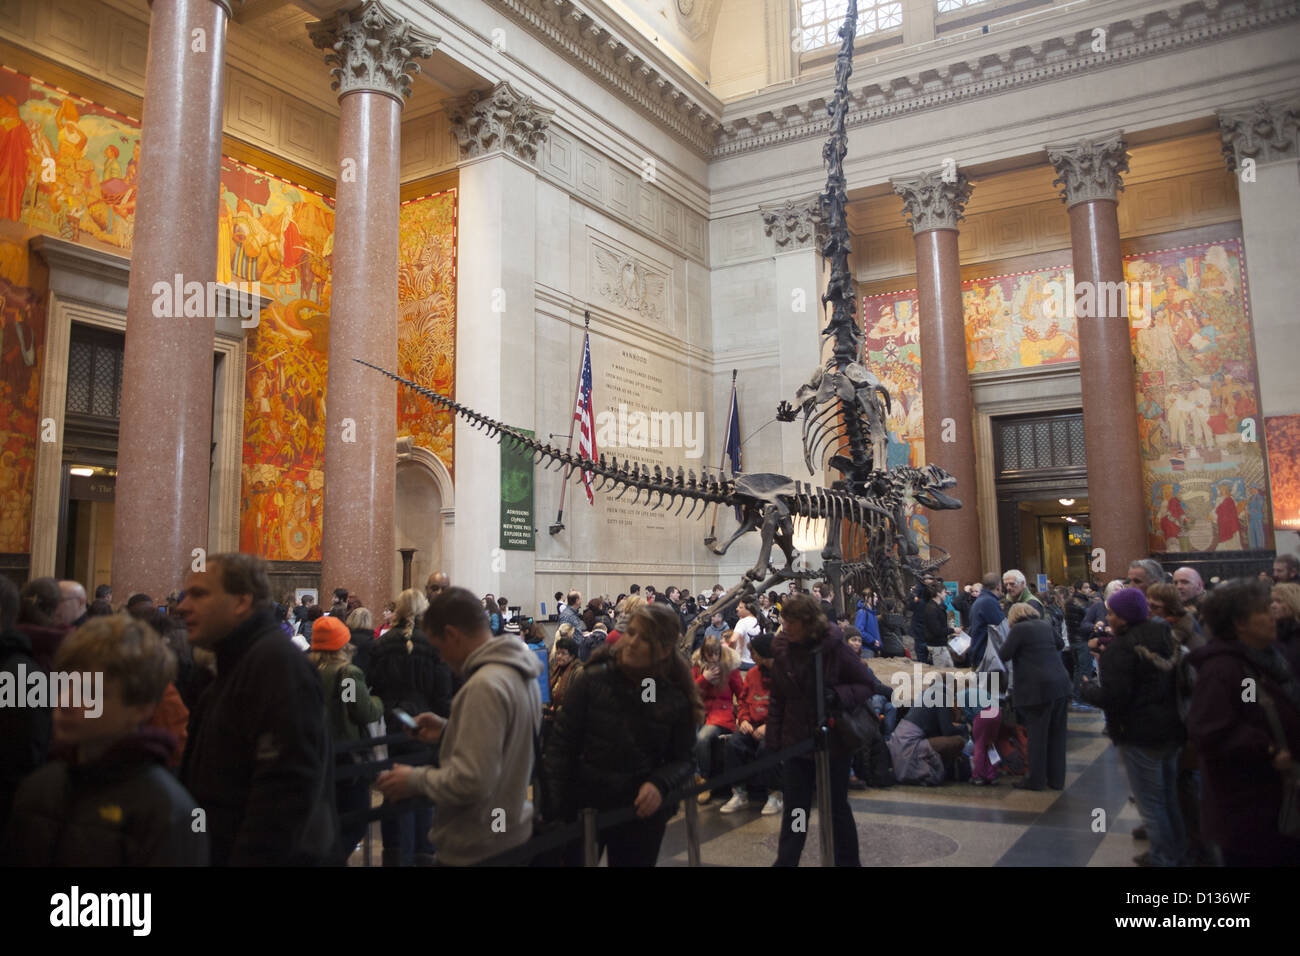 Eingangshalle im American Museum of Natural History am Central Park West in New York City. Stockfoto